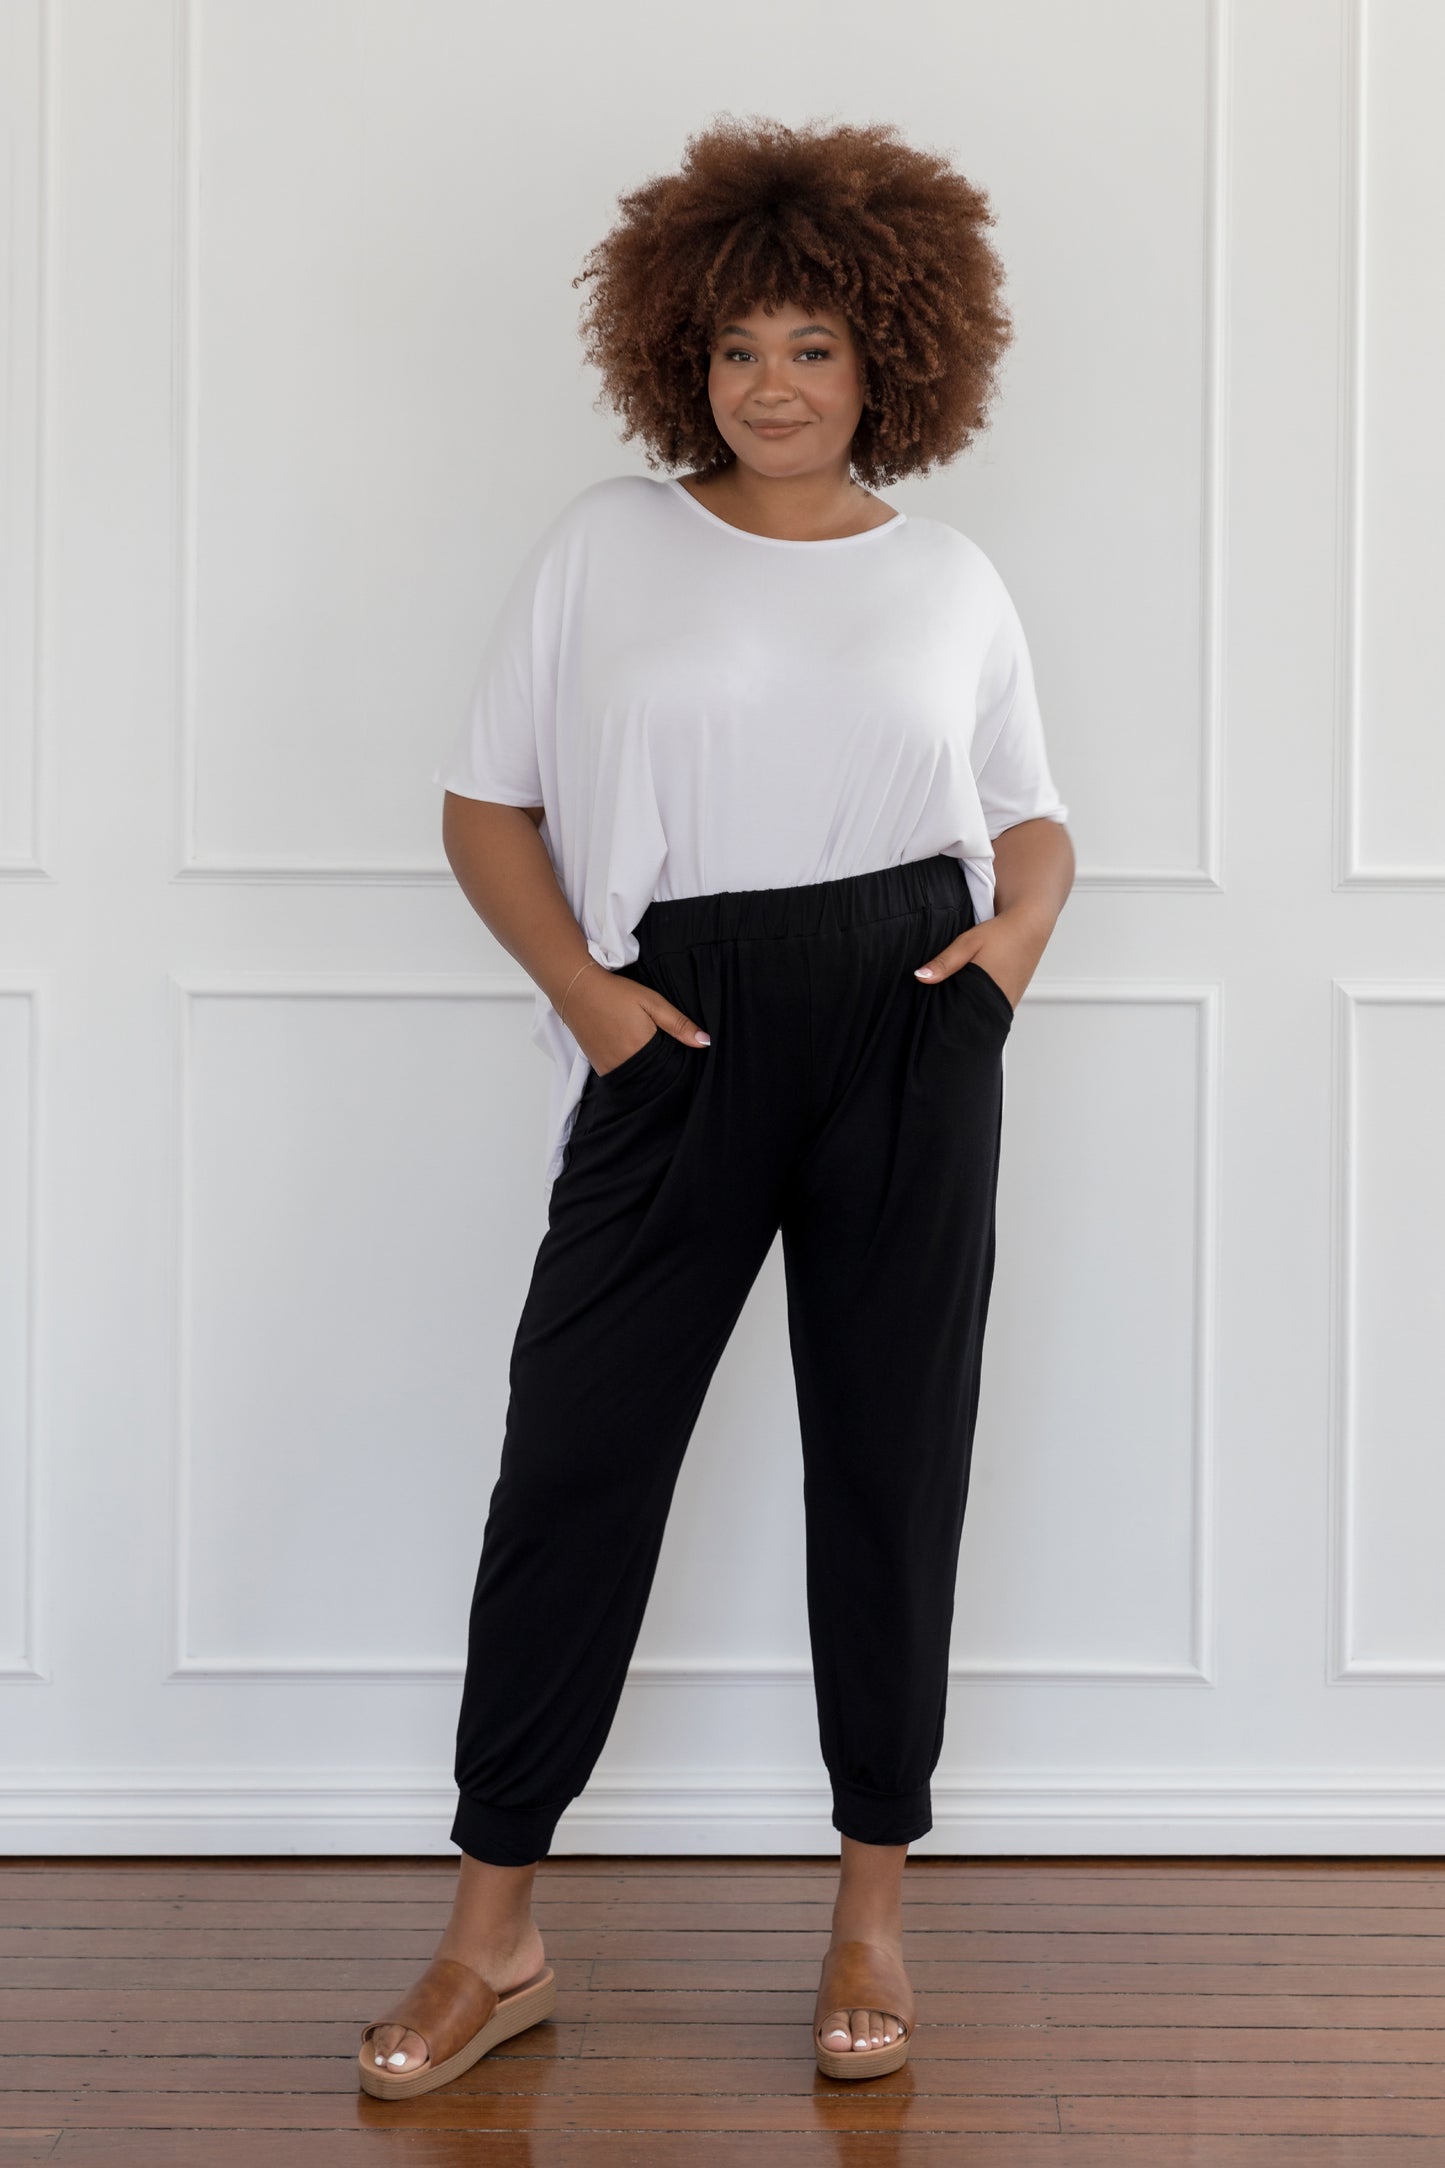 Plus-Sized Black Pants | PQ Collection | Everyday Pant